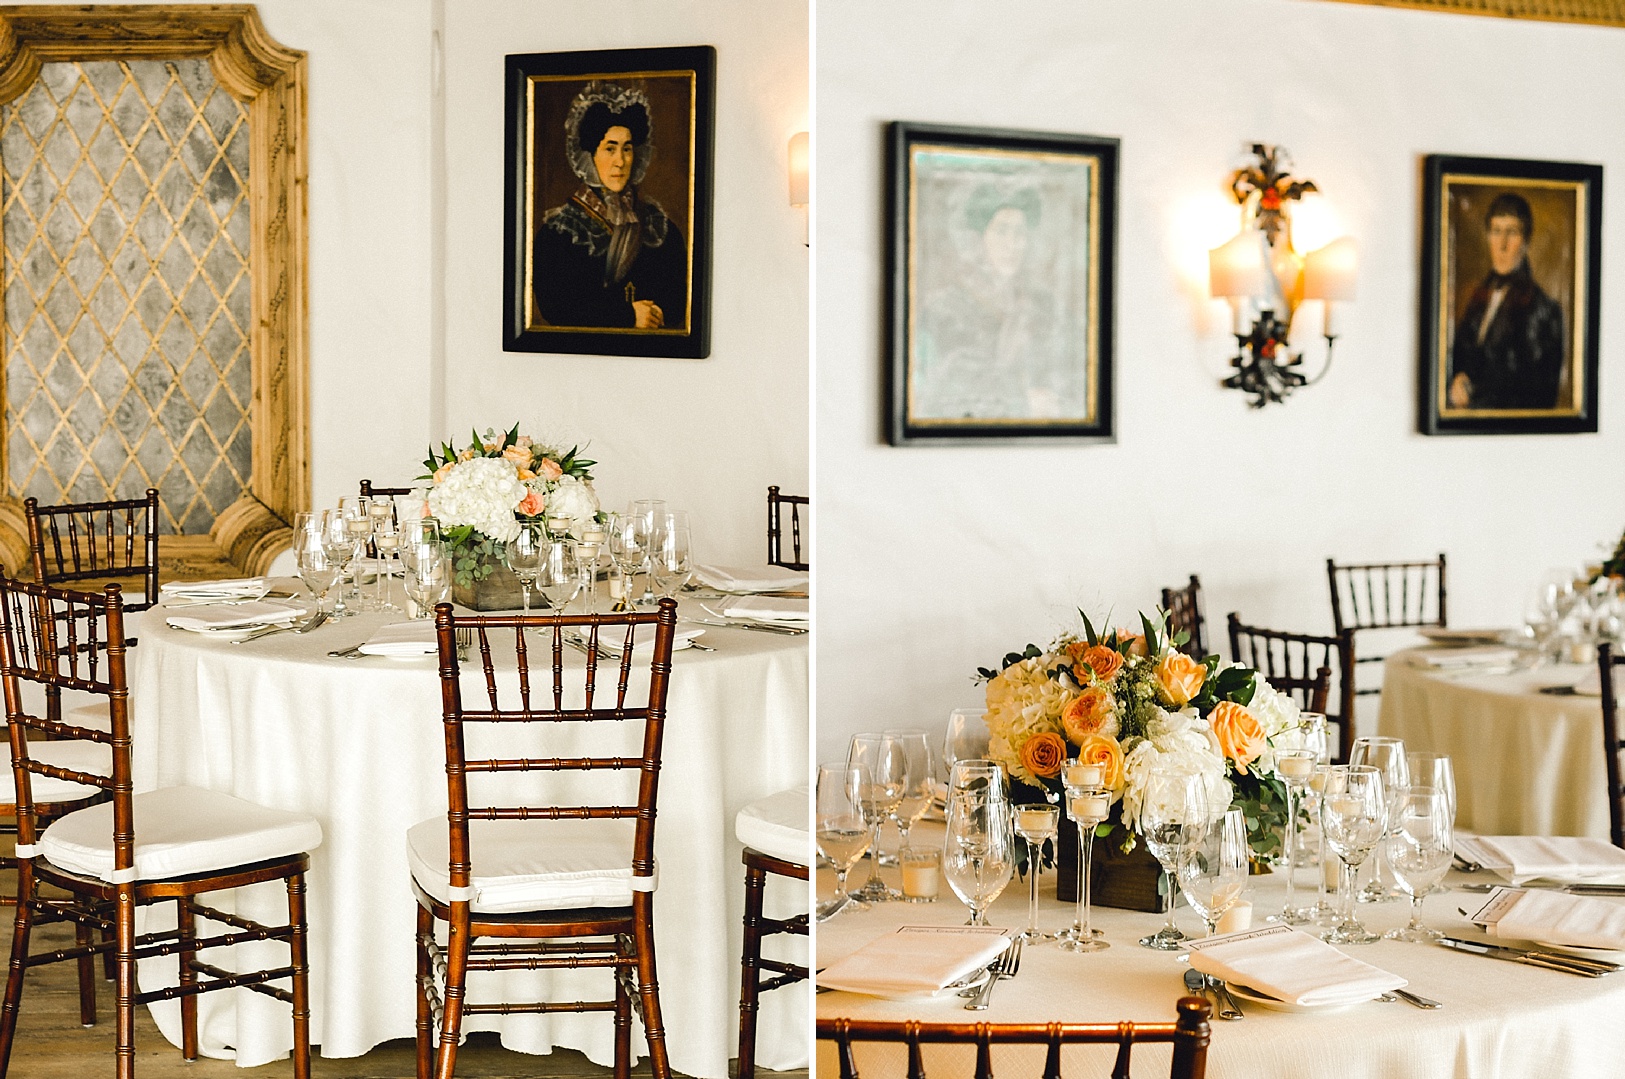 Old-world European art and classic centerpieces at a Sonnenalp wedding in Vail